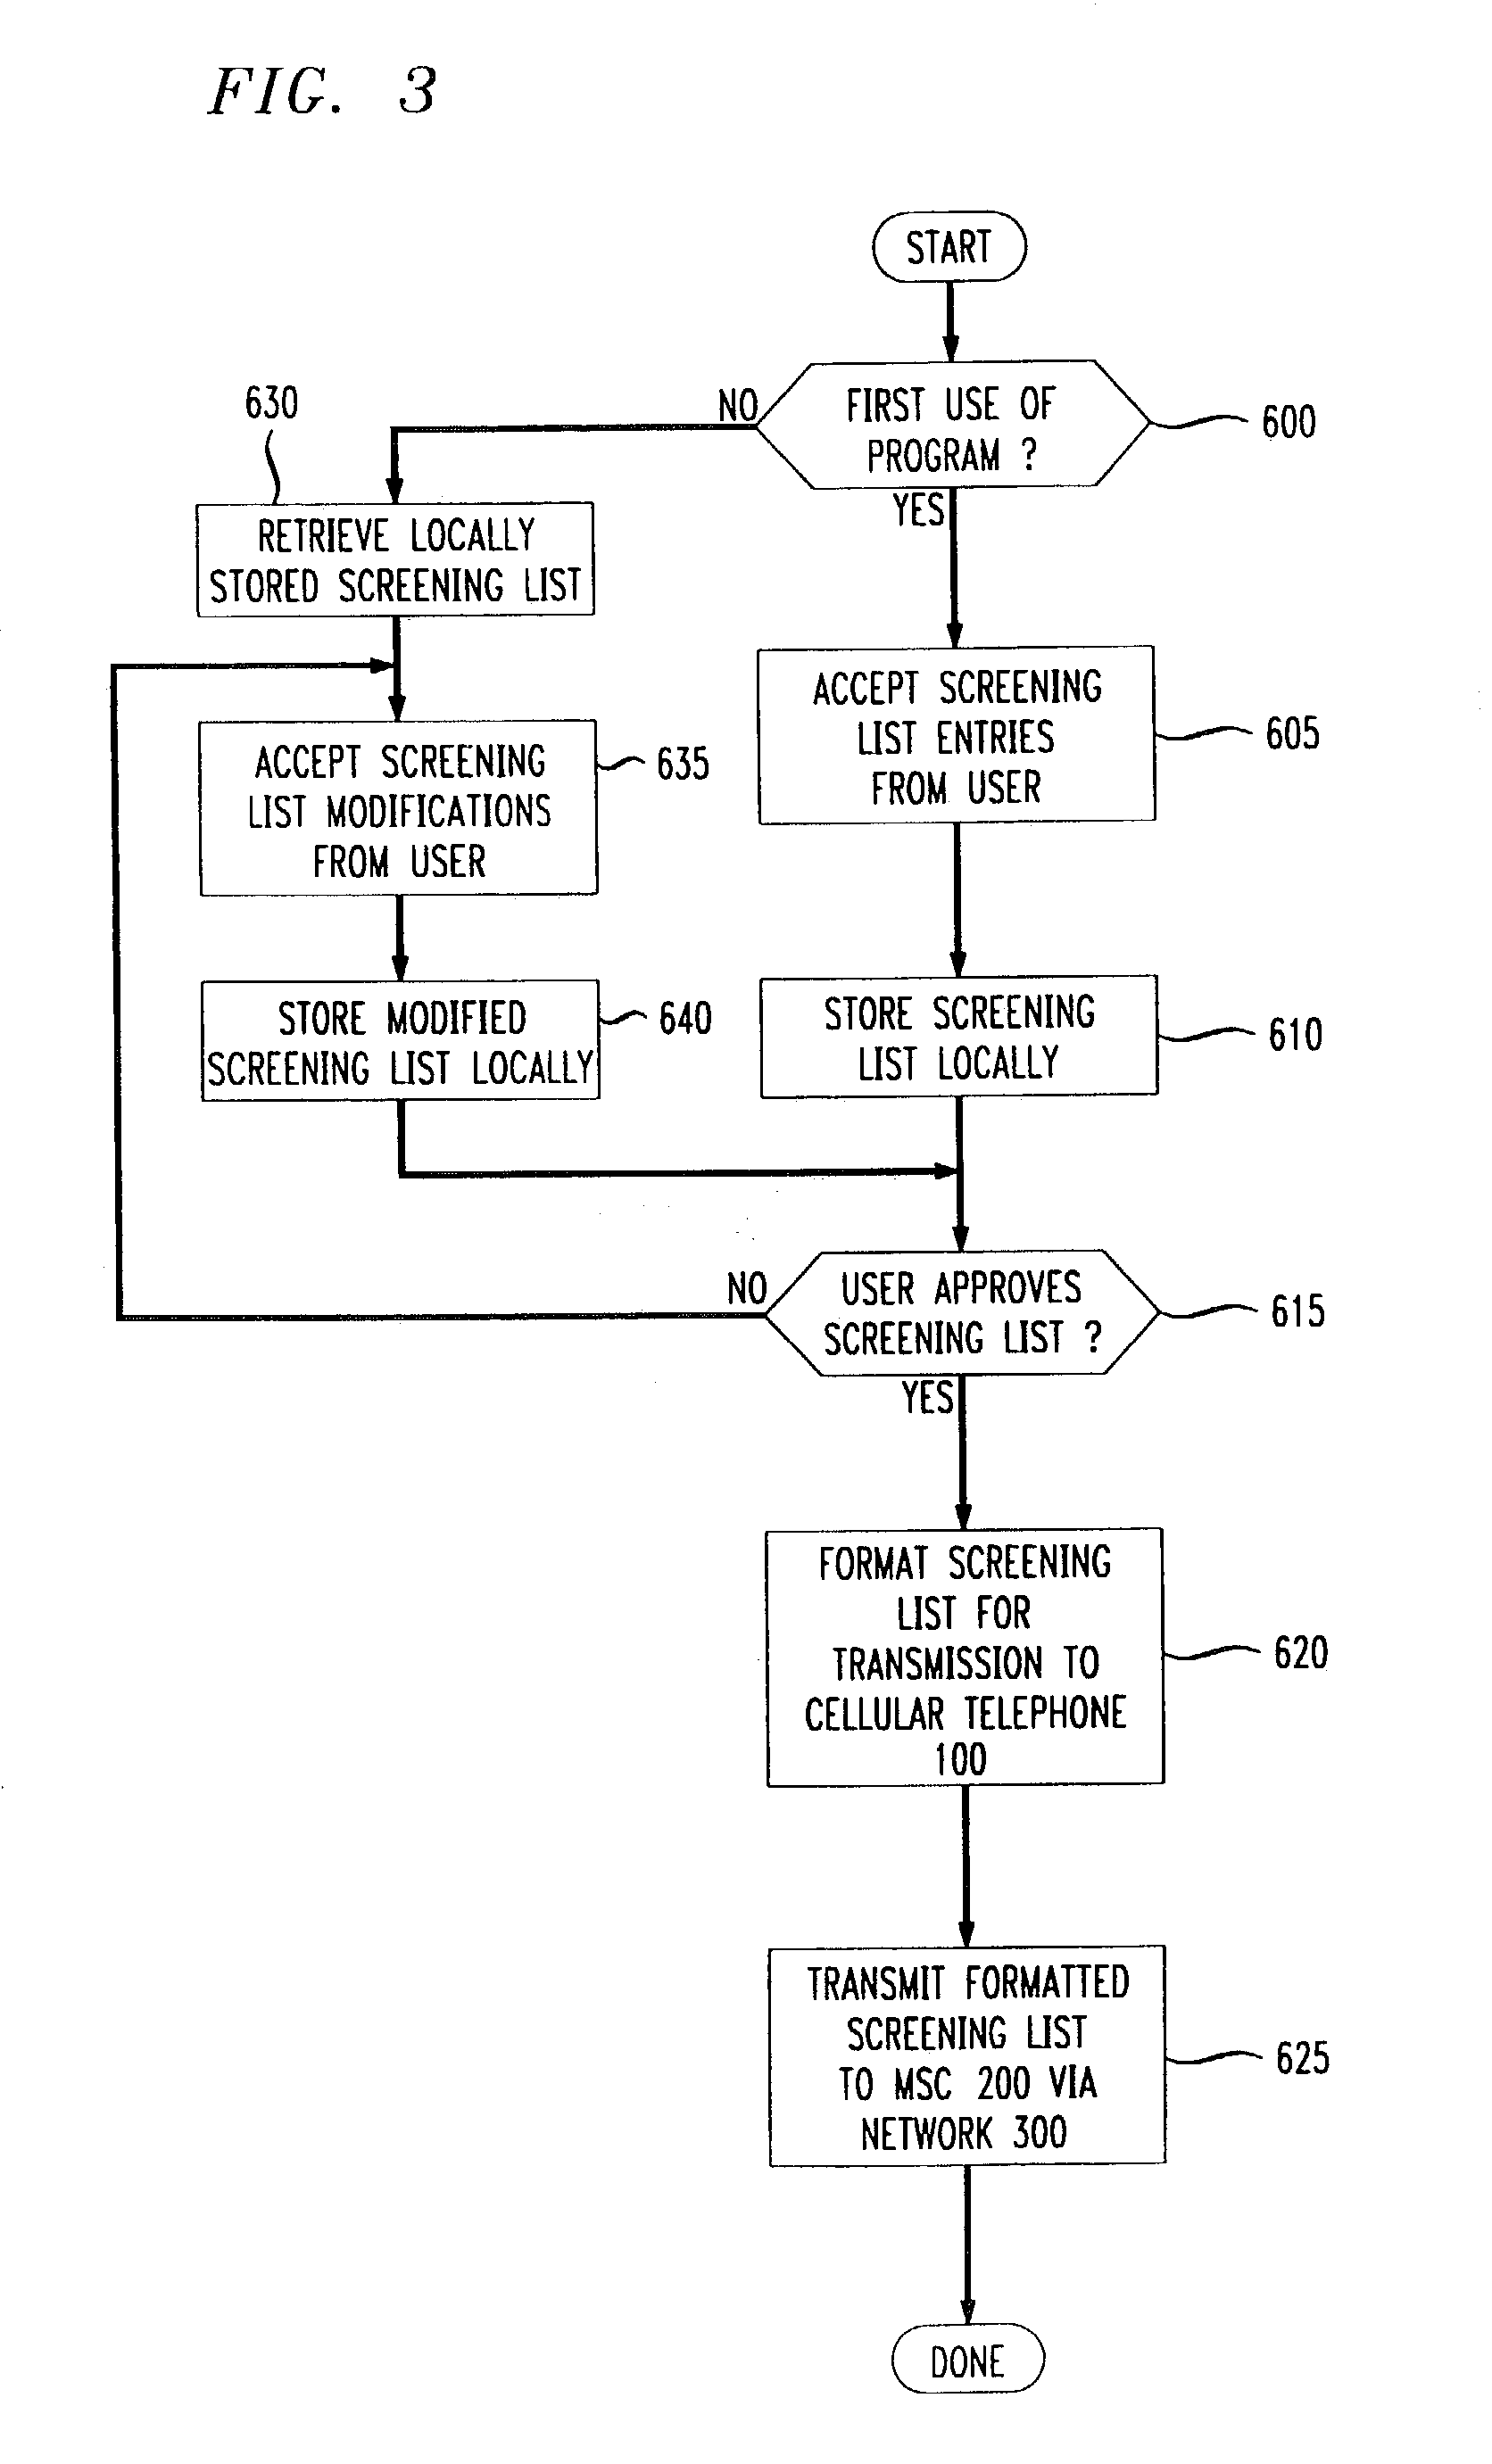 Wireless communication device with call screening